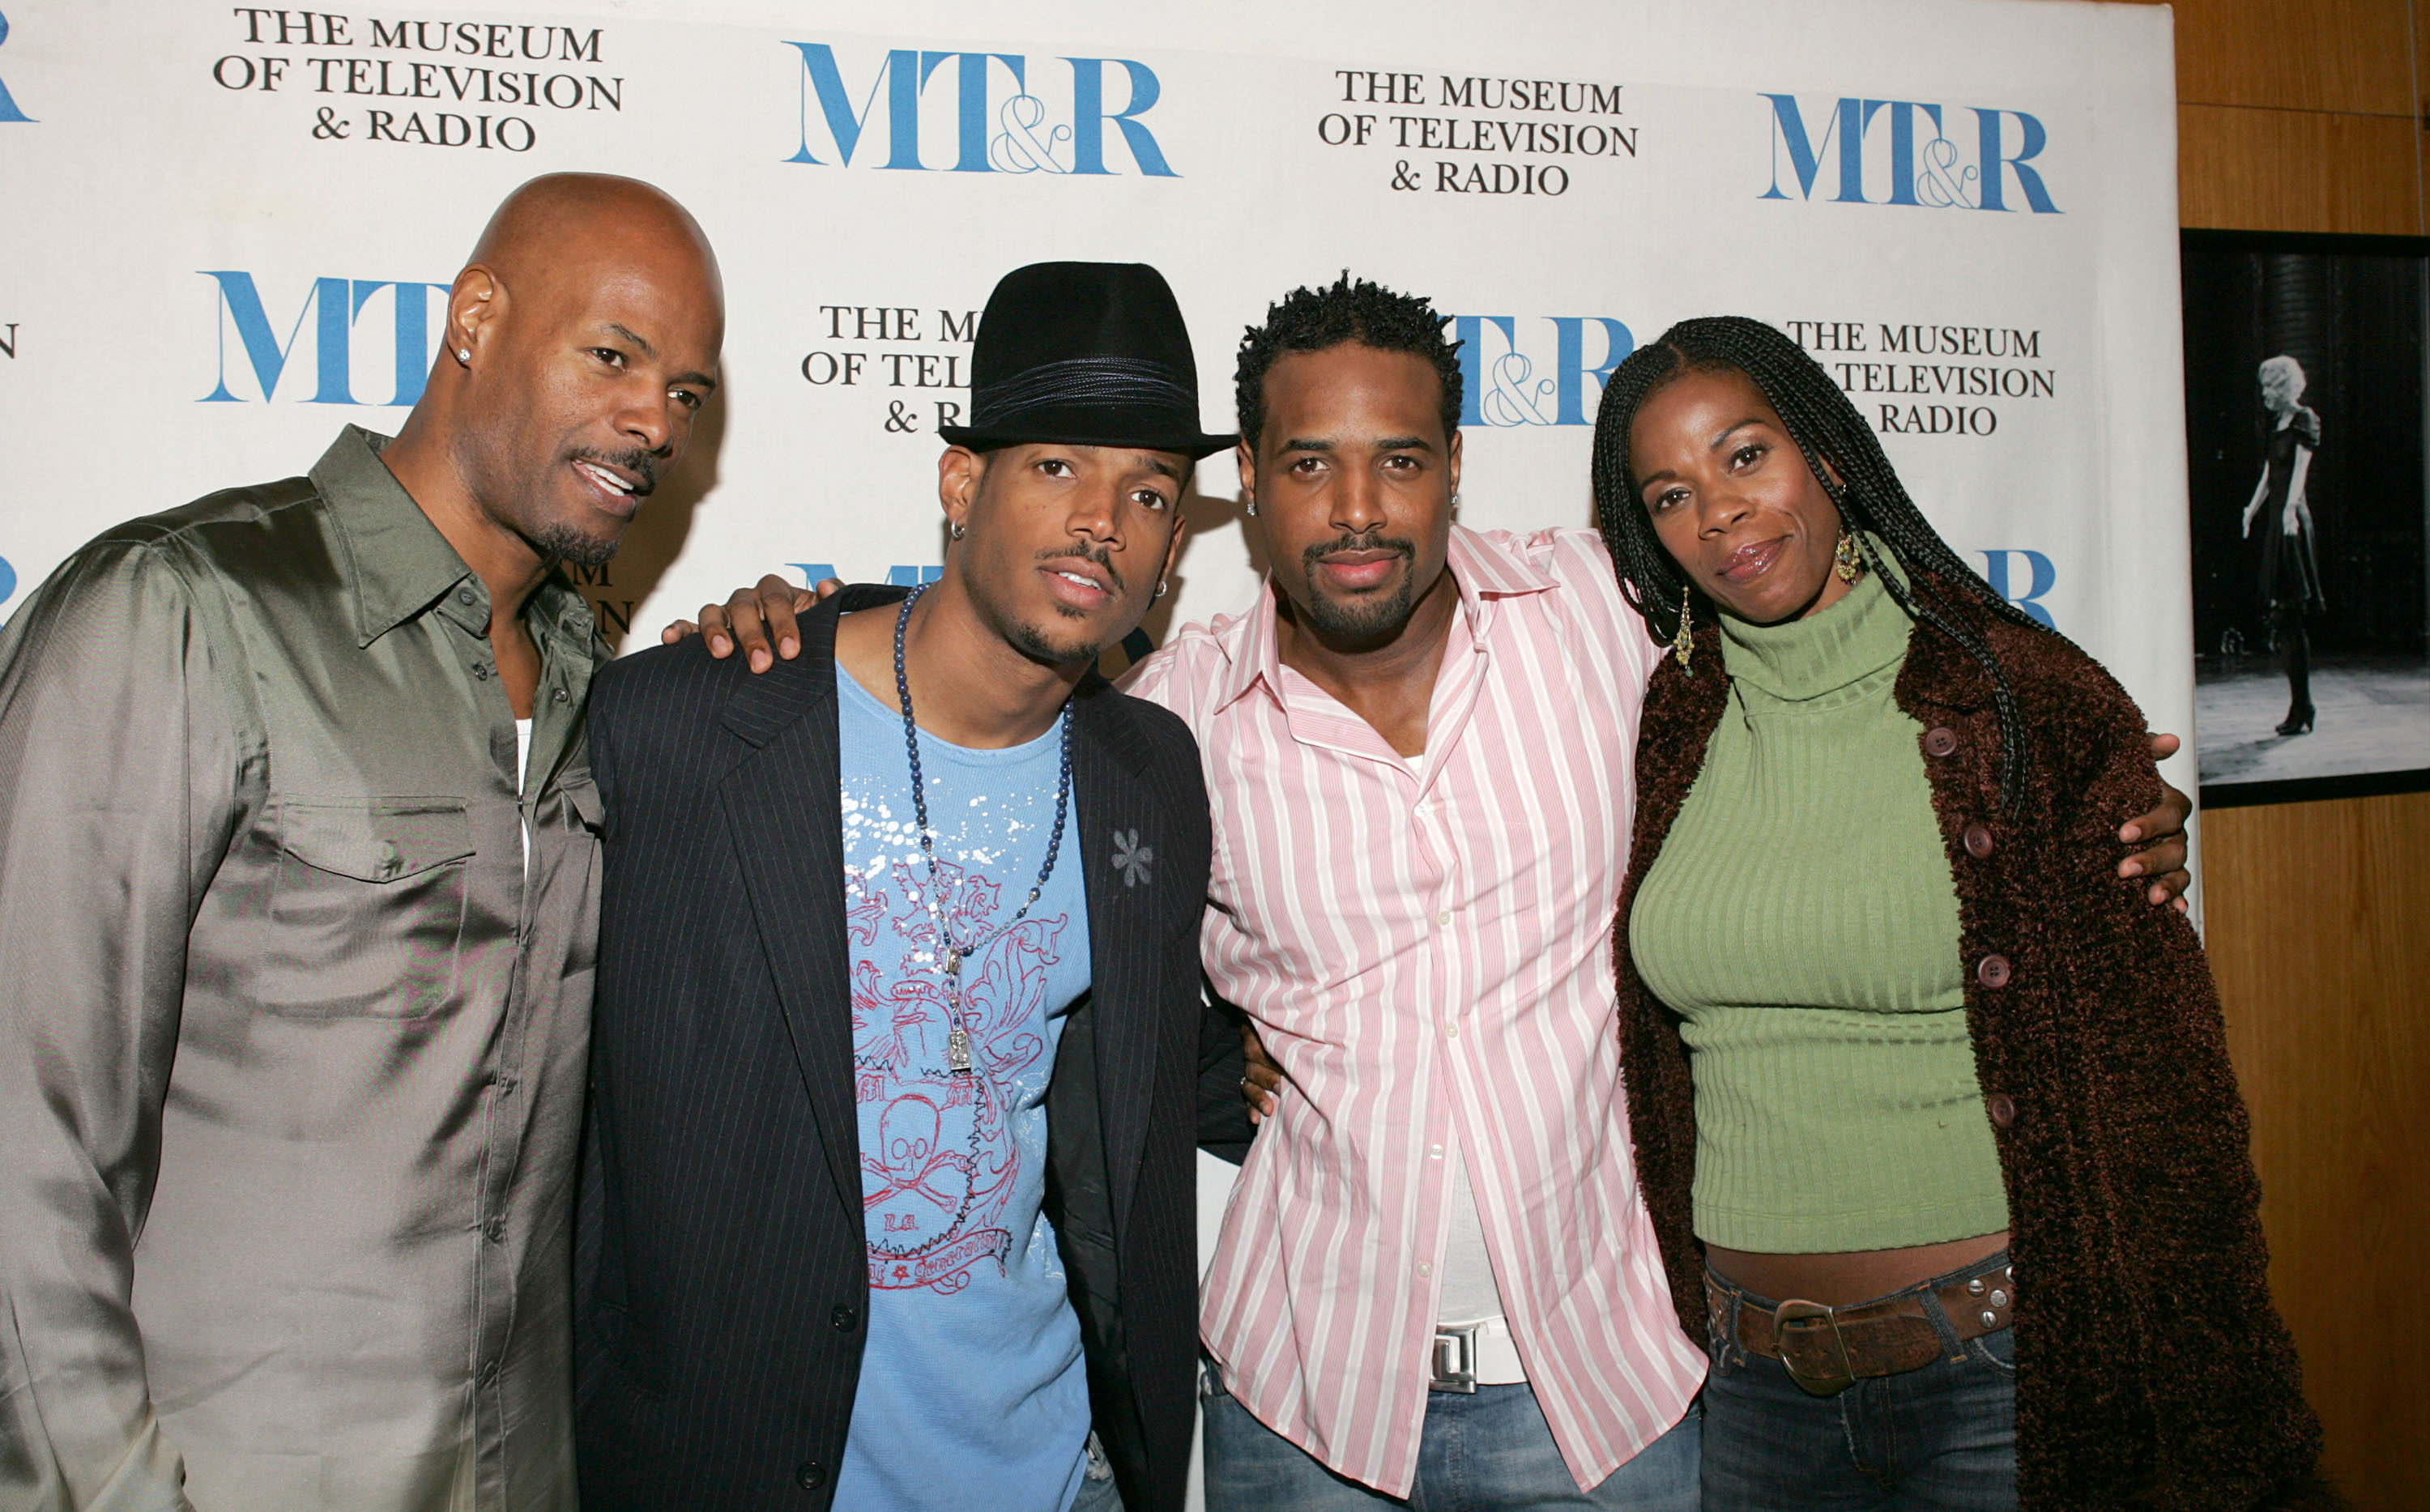 Keenen Ivory Wayans, Marlon Wayans, Shawn Wayans, and Kim Wayans at The 22nd Annual William S. Paley Television Festival on March 3, 2005. | Source: Getty Images